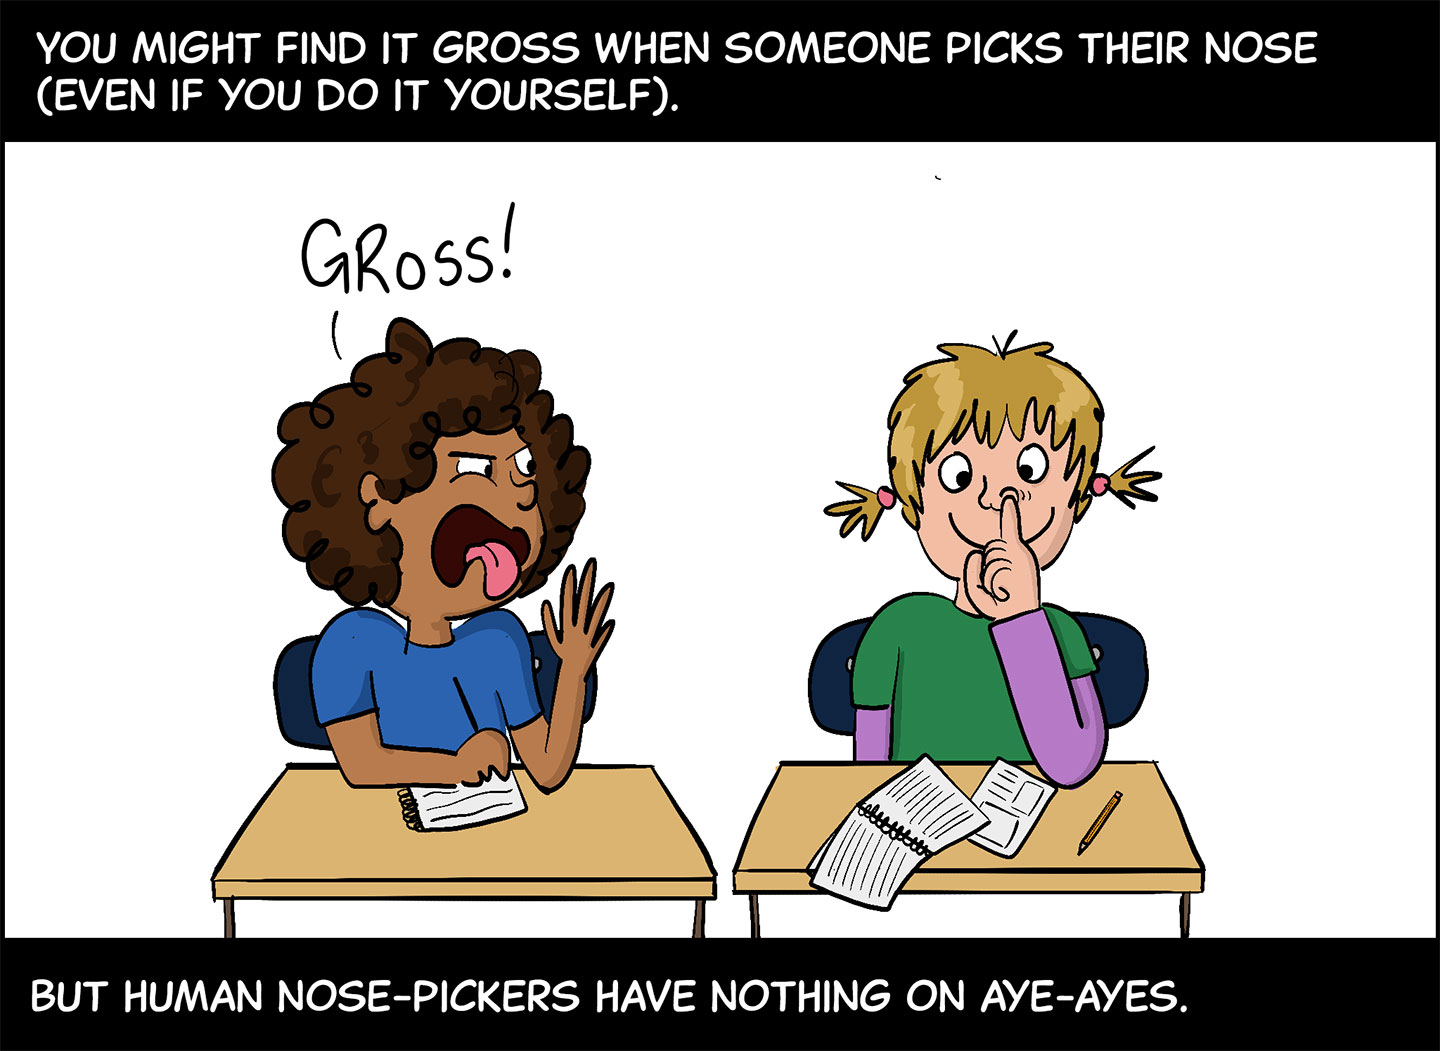 Panel 2. Text (above image): You might find it gross when someone picks their nose (even if you do it yourself). Image: A Black girl and a white girl are sitting at side-by-side desks. The white girl is picking her nose, while the Black girl sticks out her tongue and says, “Gross!” Text (below image): But human nose-pickers have nothing on aye-ayes. 